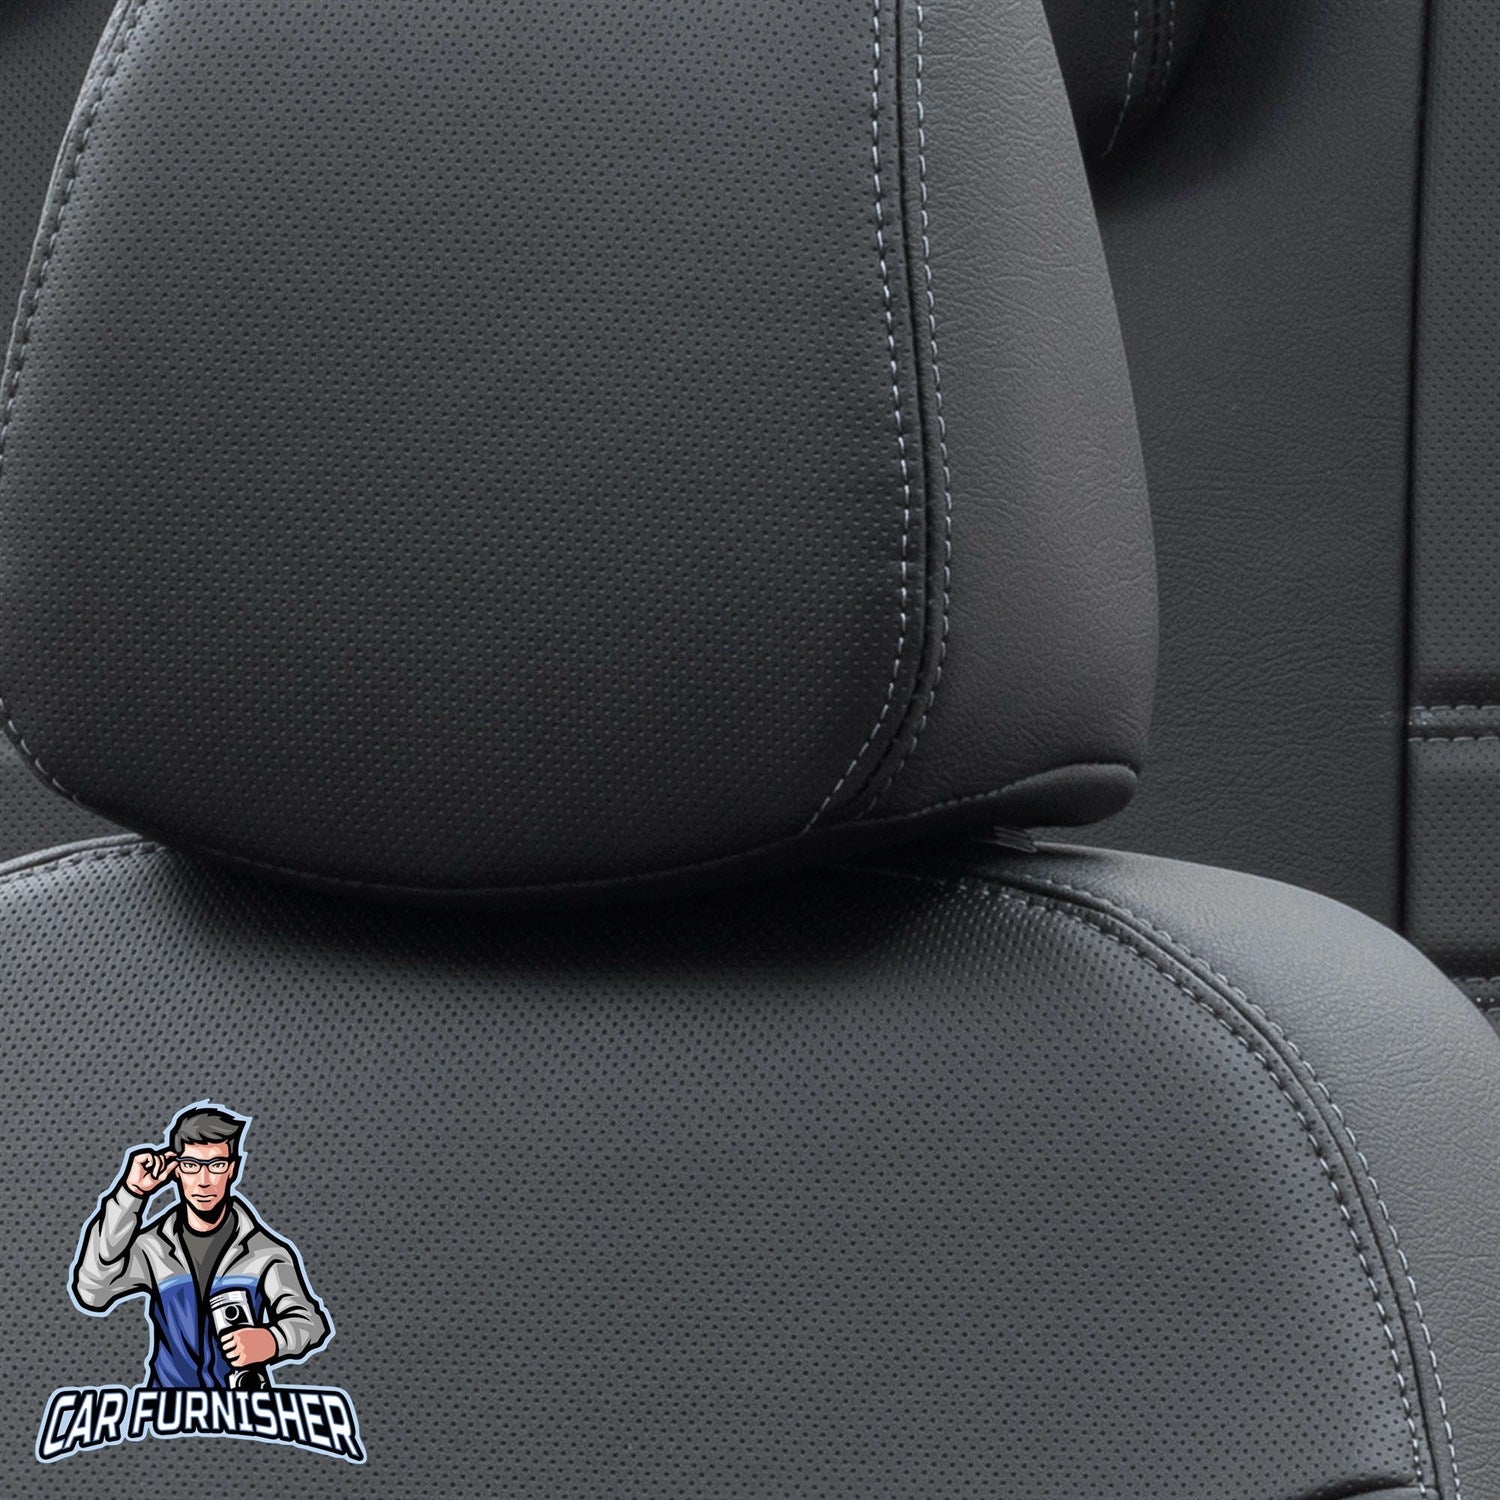 Mercedes Sprinter Car Seat Covers 2000-2023 Istanbul Design Black Leather & Fabric